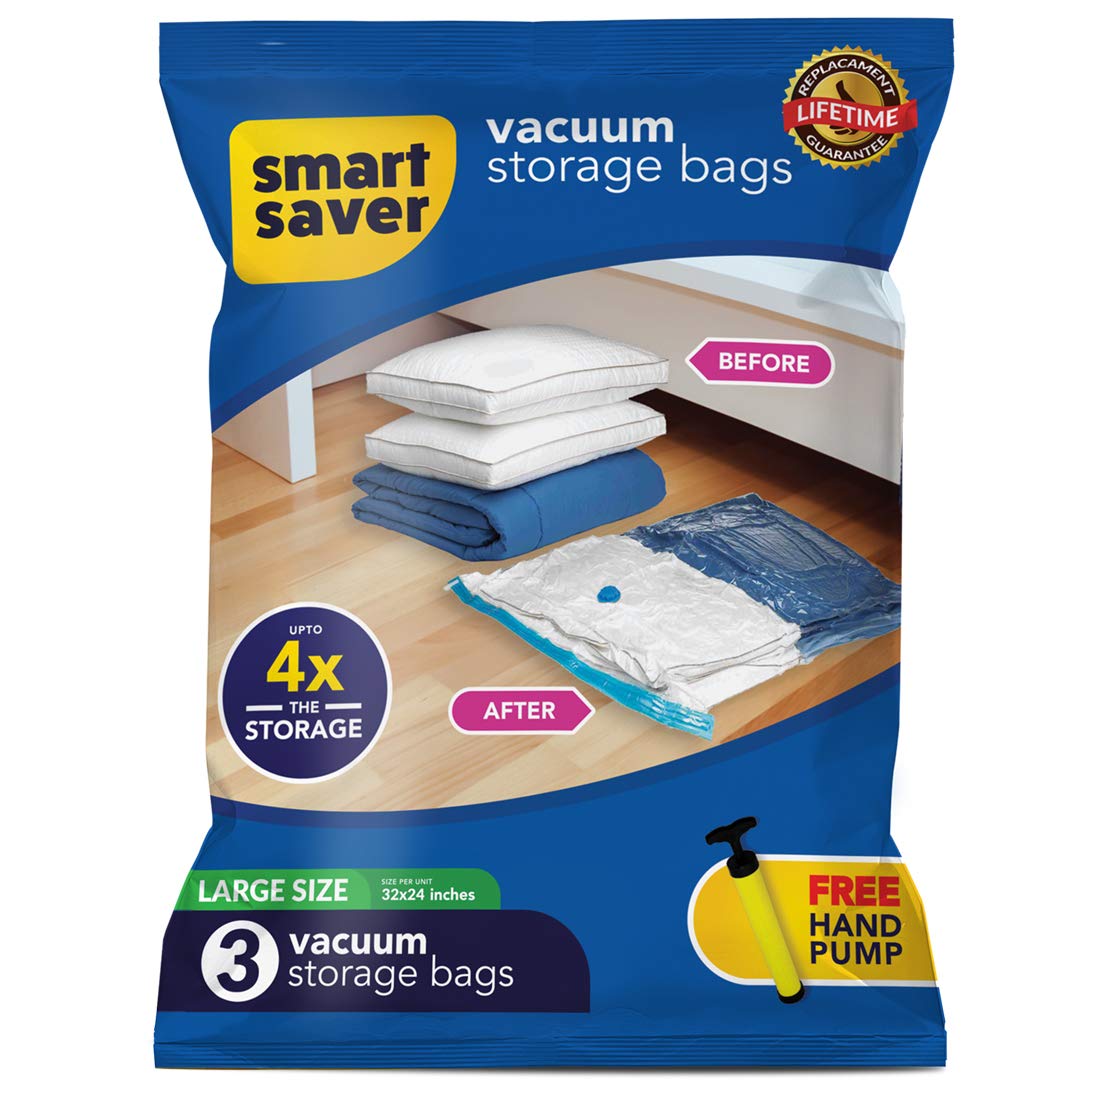 Vacuum Storage Bag For Home Use - A Space Saving Solution For Storing  Blankets, Clothing, And Bedding. This Compression Bag Comes With A Built-in Electric  Pump And Is Ideal For Travel Or